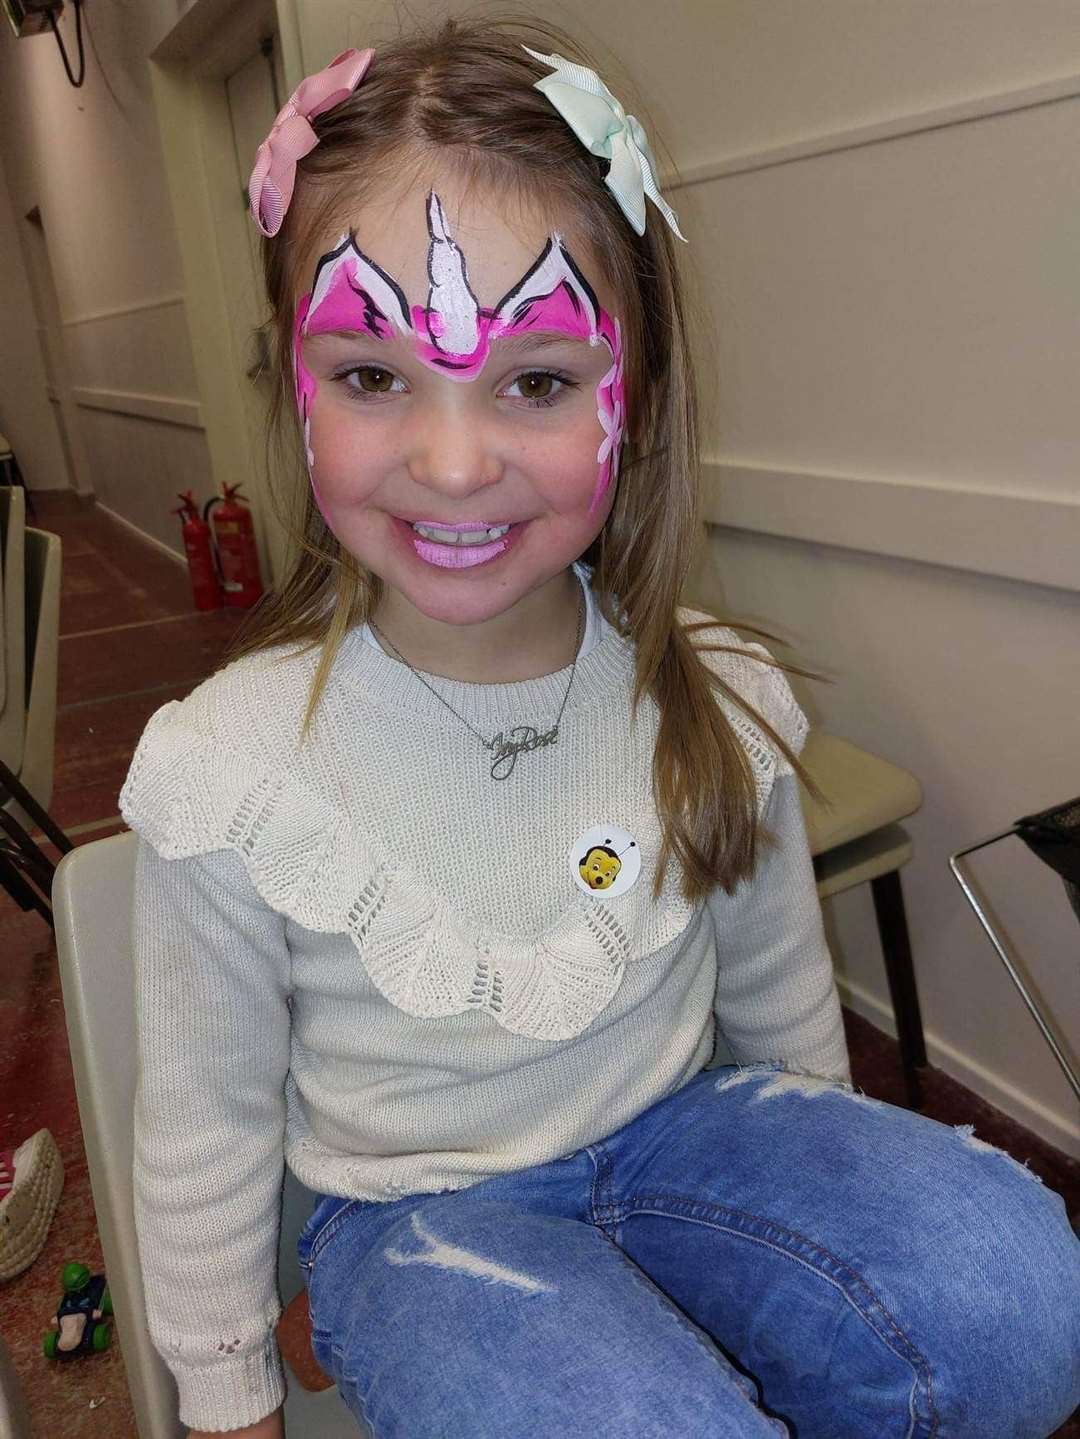 Jade's daughter Ivy was delighted with her face-paint.